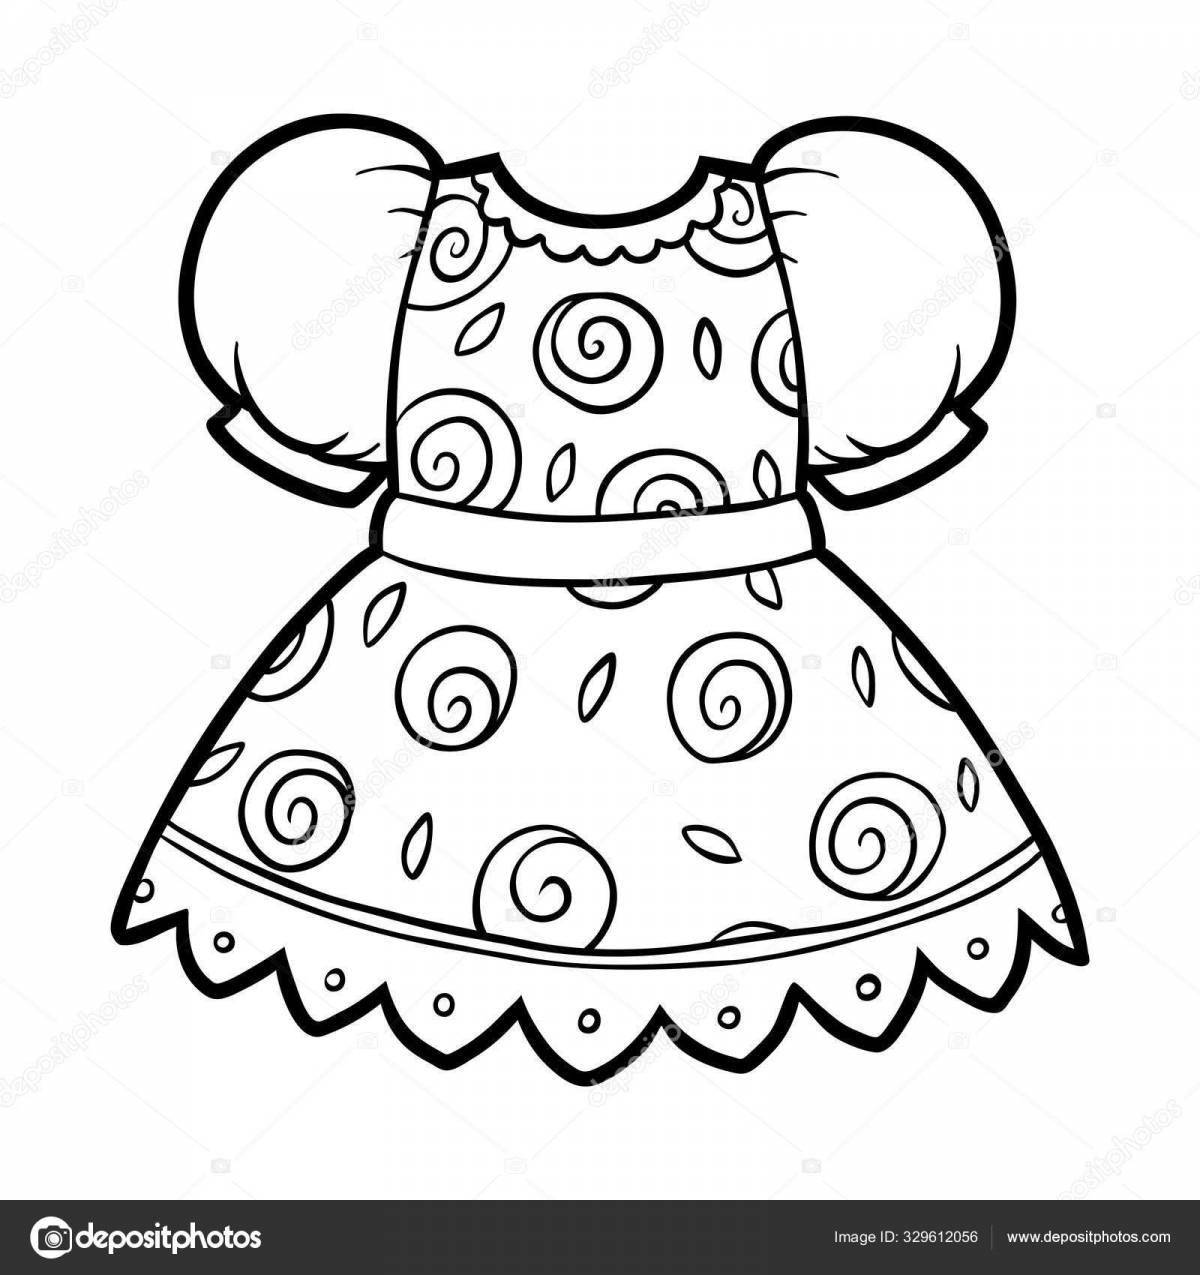 Coloring doll dress with colored splashes for children 3-4 years old